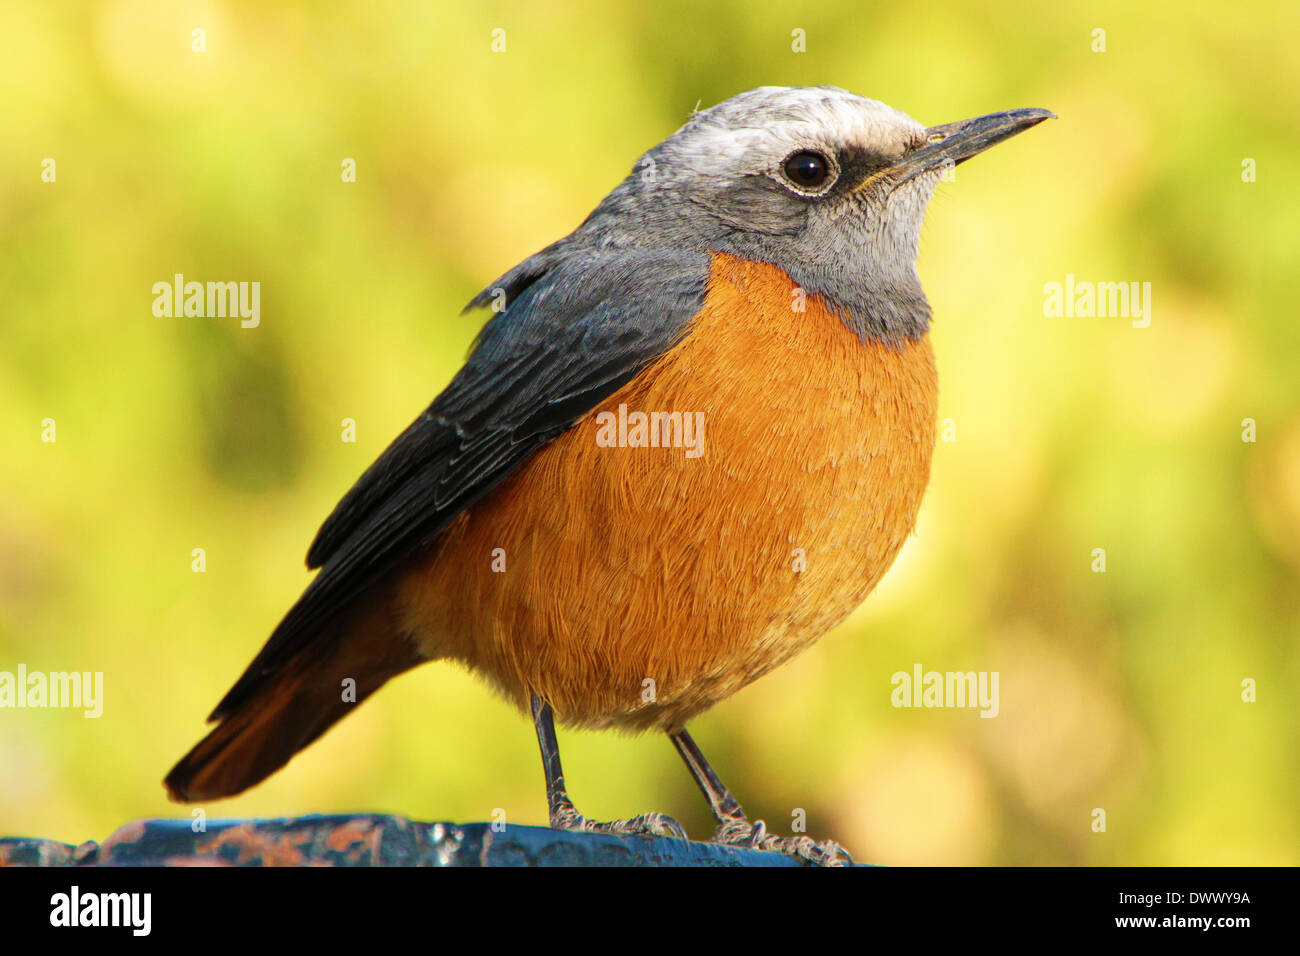 Sentinel Or Short Toed Rock Thrush High Resolution Stock Photography and  Images - Alamy